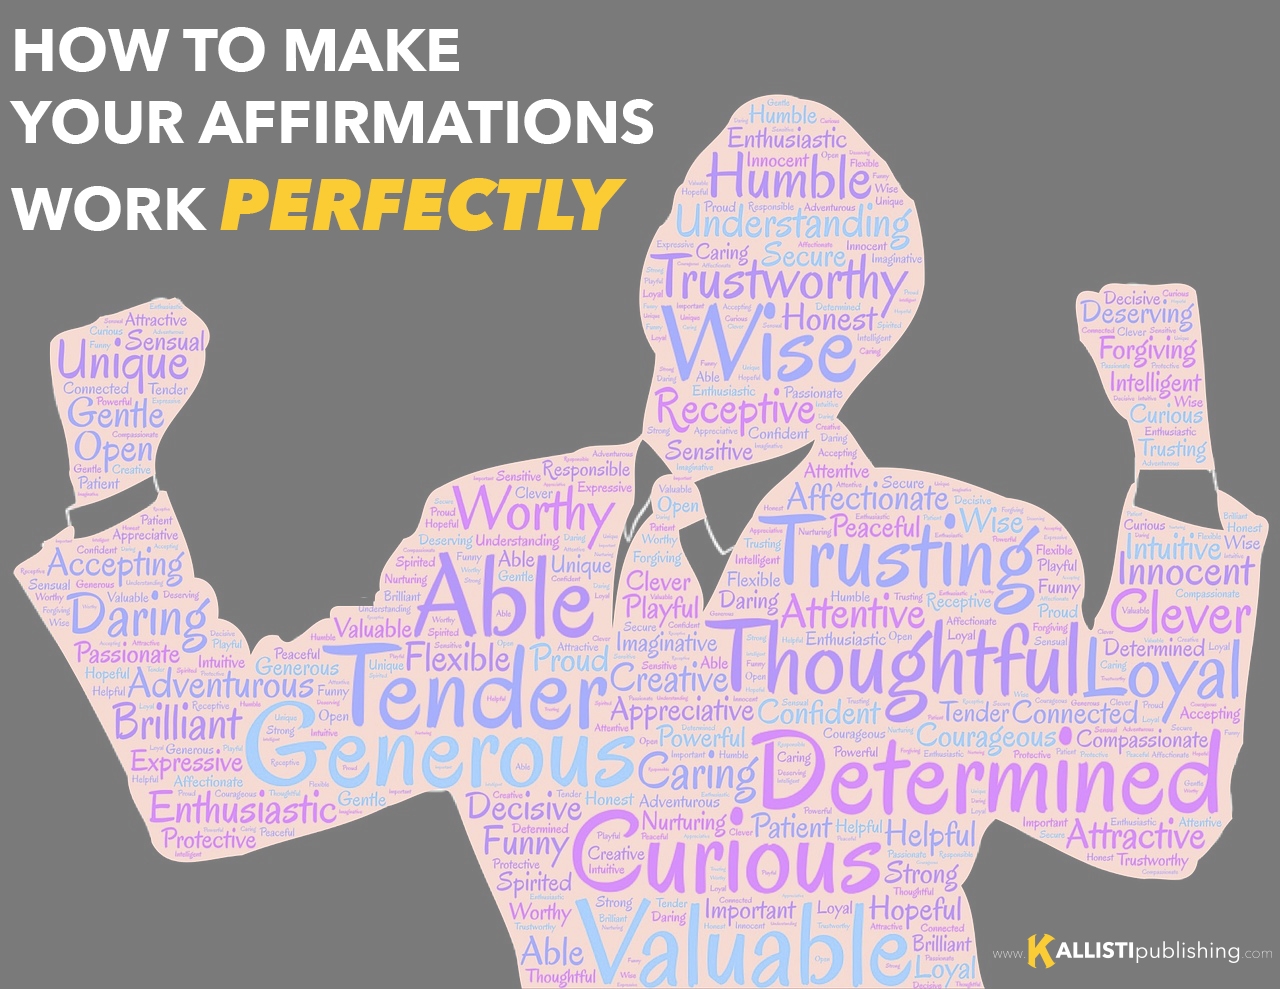 How to Make Your Affirmations Work Perfectly